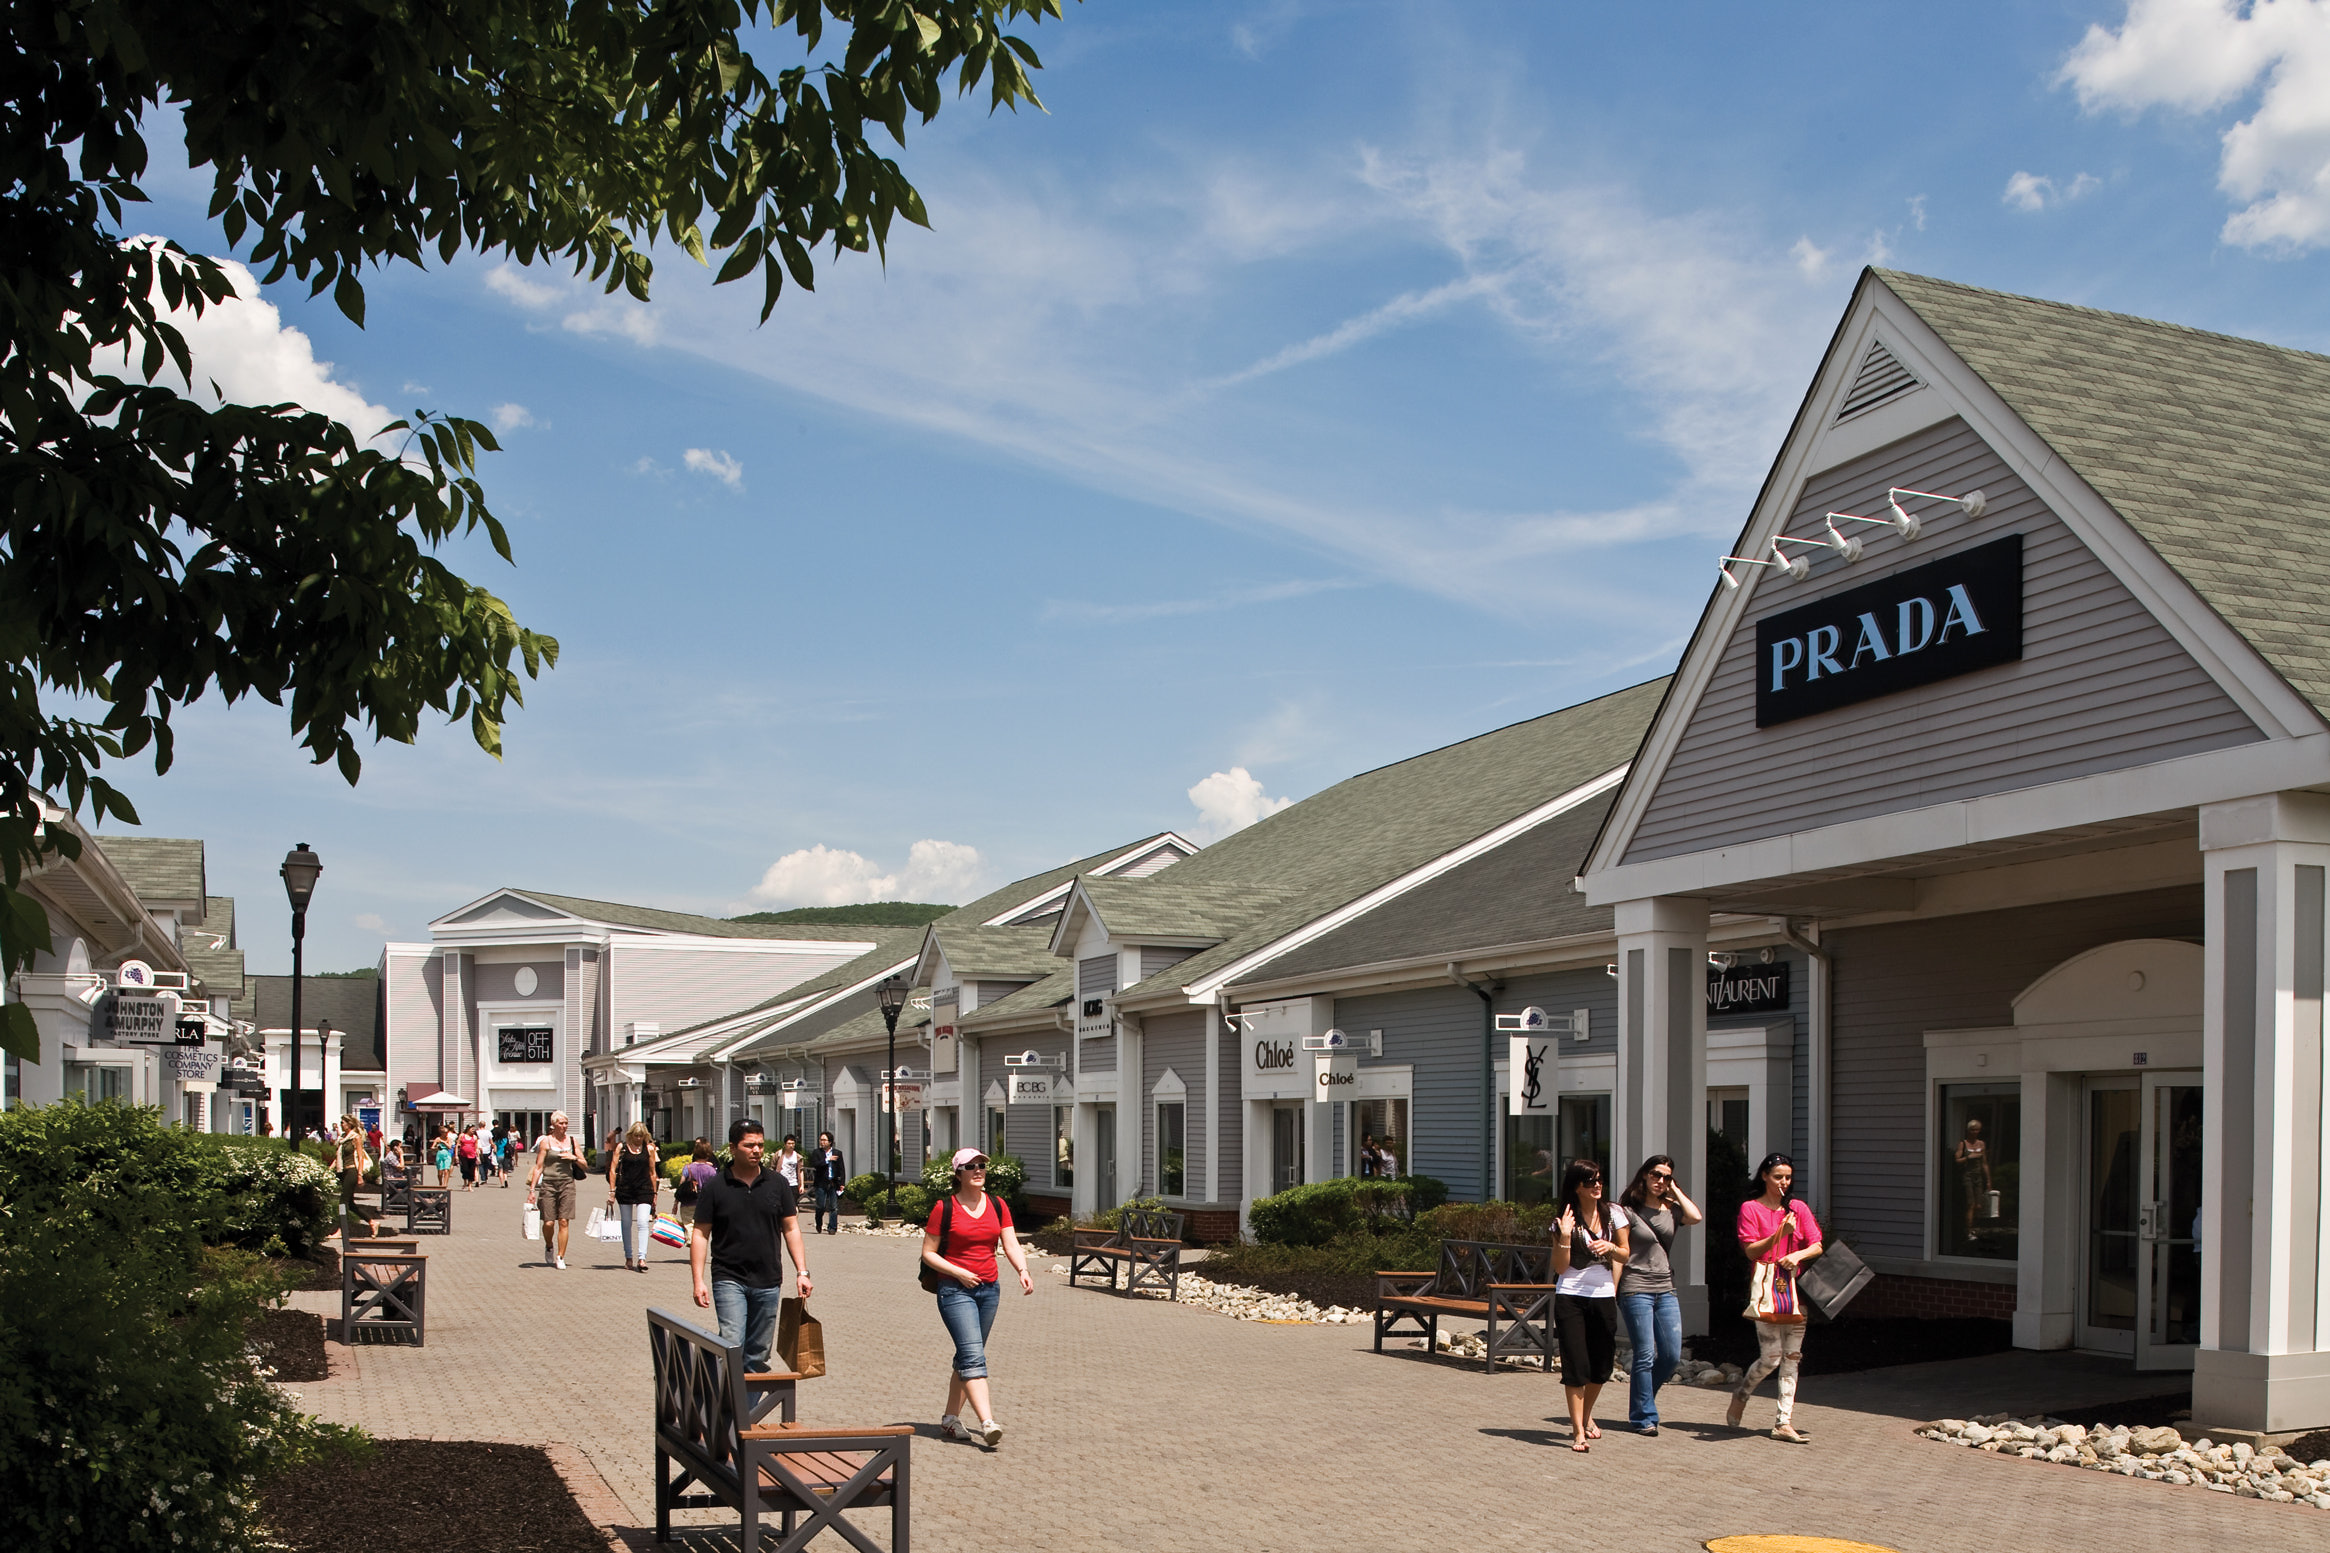 Come shopping with me at the woodbury commons outlet mall